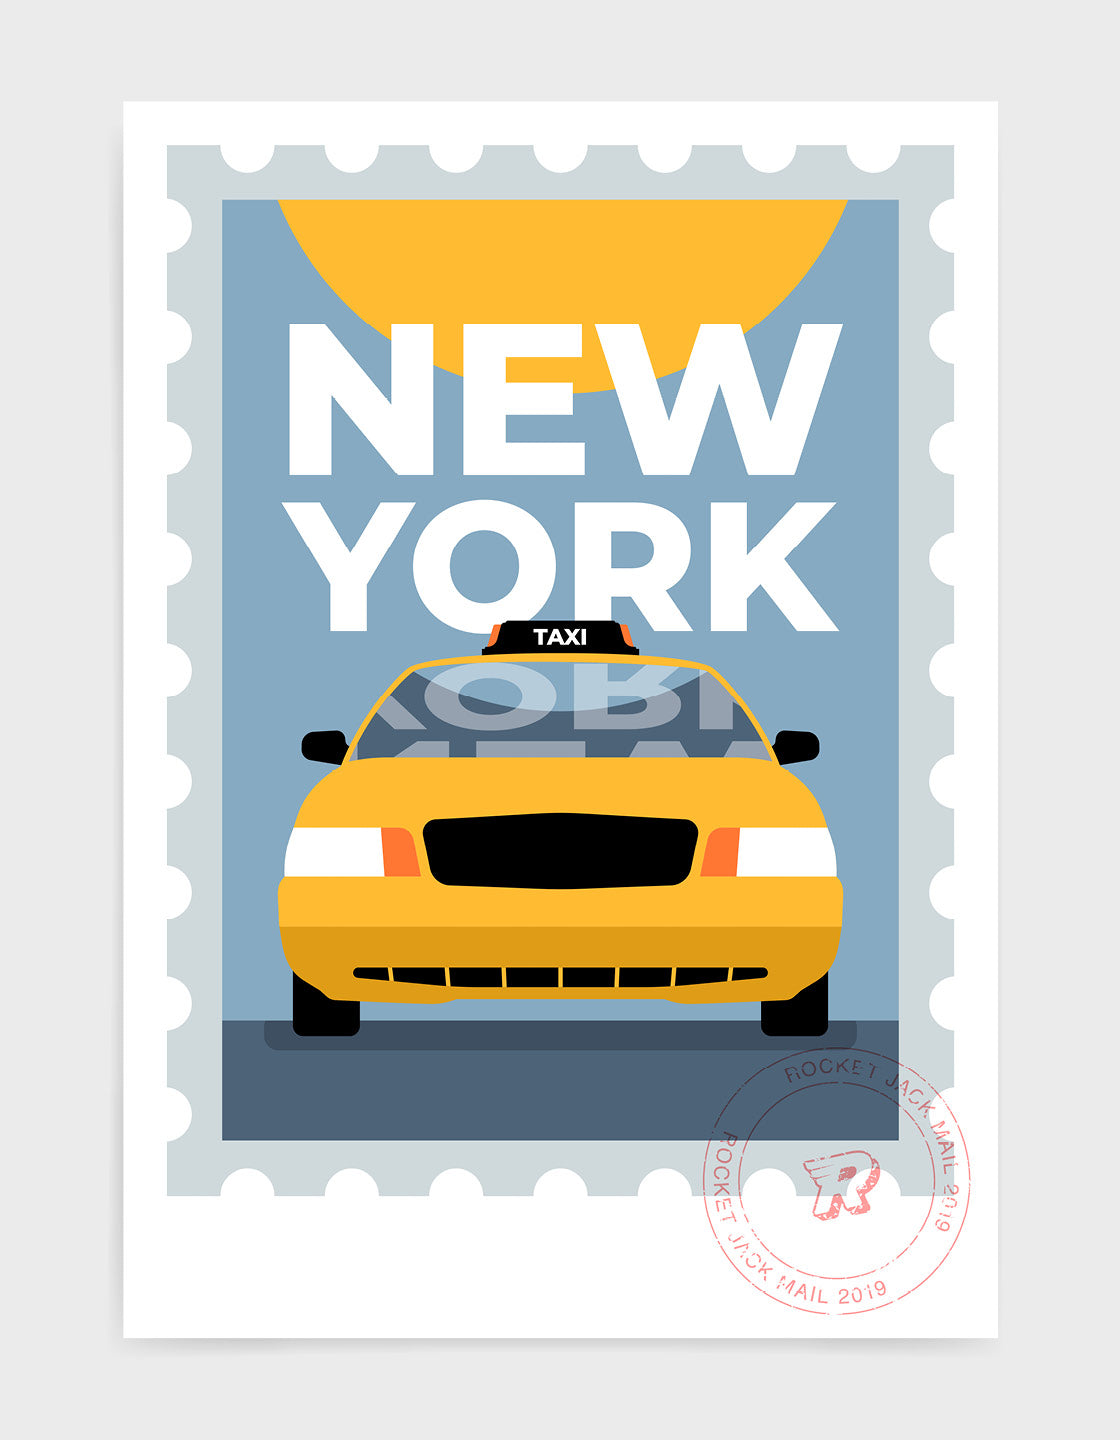 New york city travel poster featuring a yellow taxi on a grey and yellow background with bold type